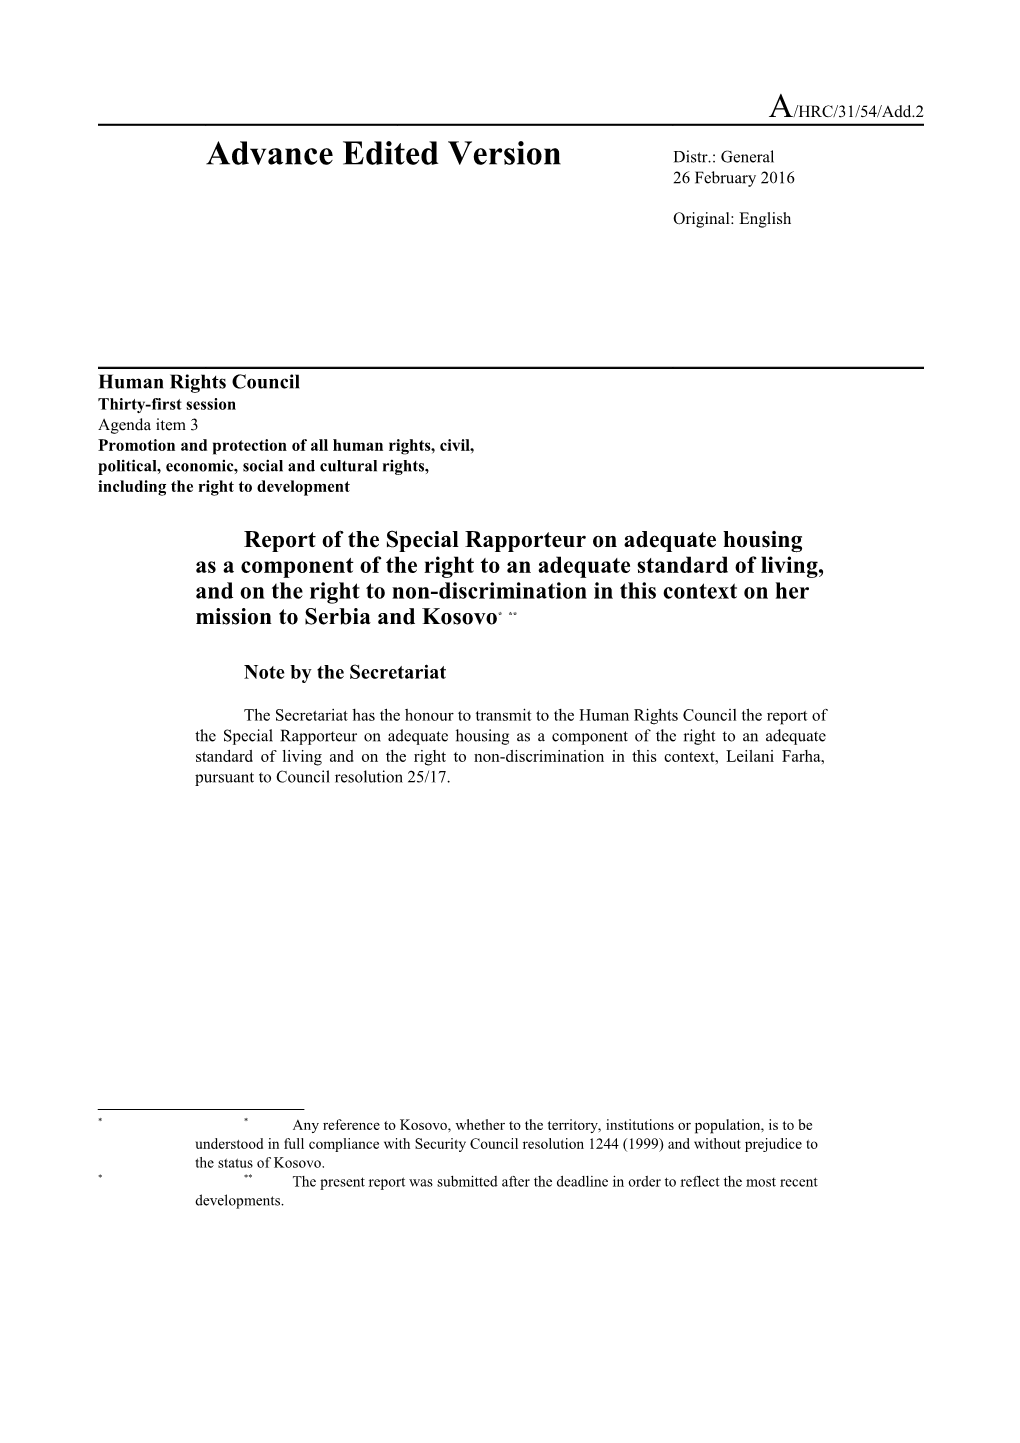 Report of the Special Rapporteur on Adequate Housing As a Component of the Right to An